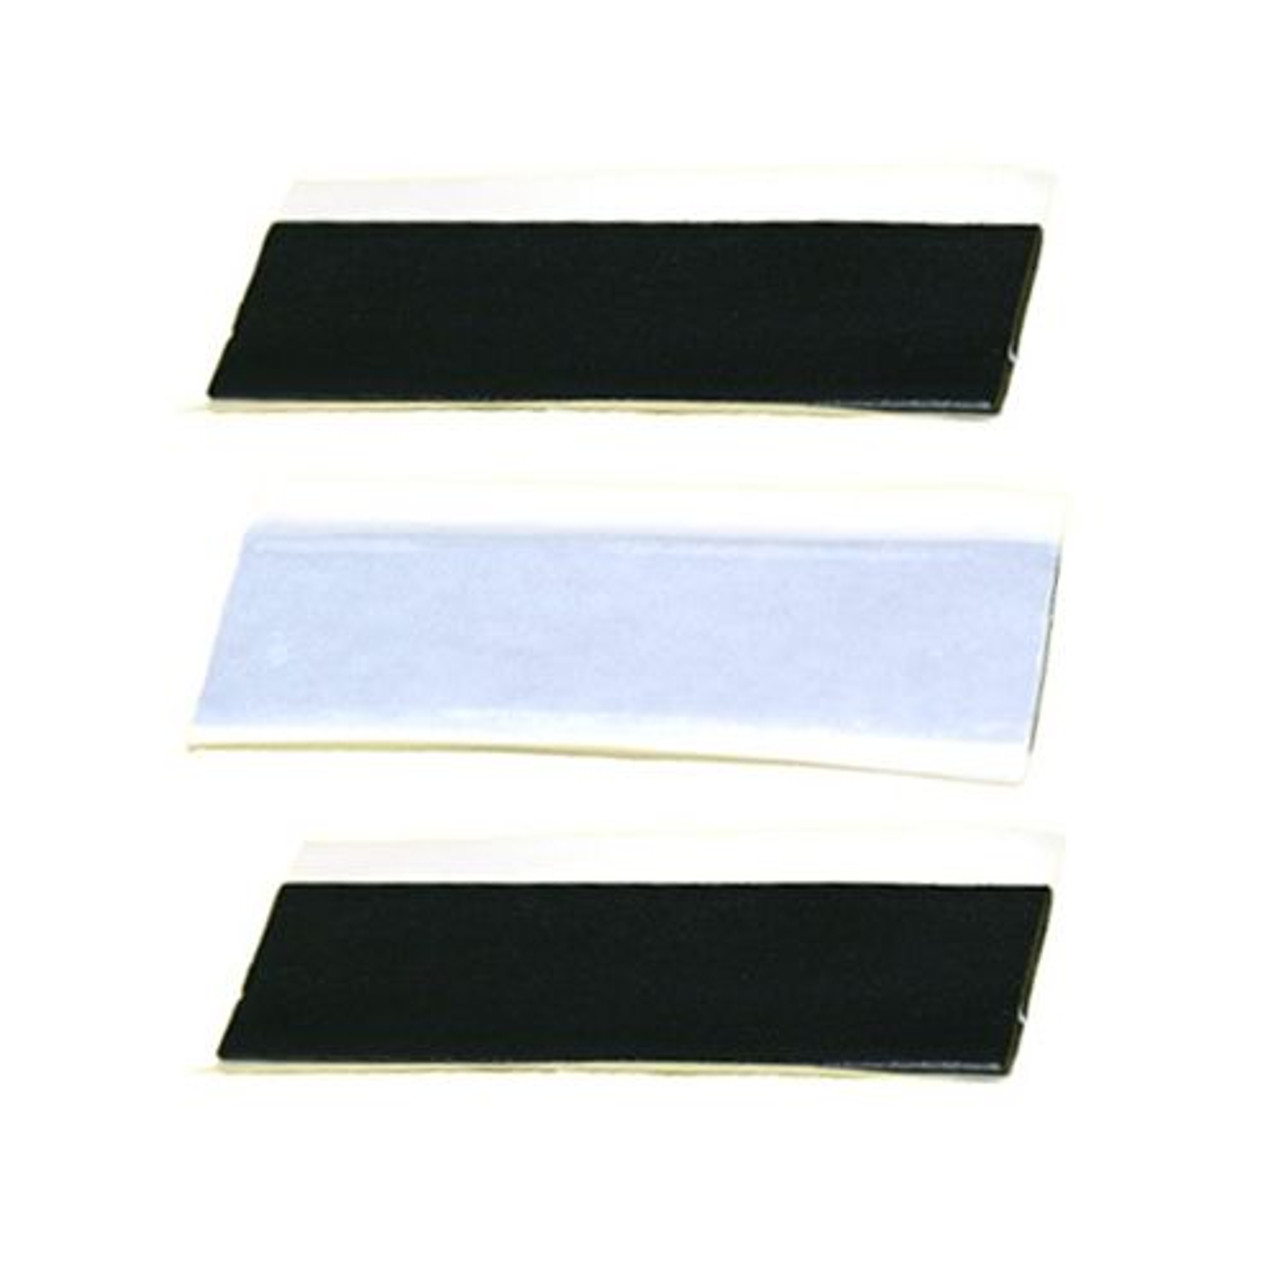 Eagle Pitch Pad 3 Pack Strip Sealing Tape TV Antenna Mount Weather Proof Tar 1" x  5" Inch Antenna Tri-Pod Pitch Pad Sealing Strip 1 Pack Tar Seal Proof Strips DSS , Part # Perfect DSSPP